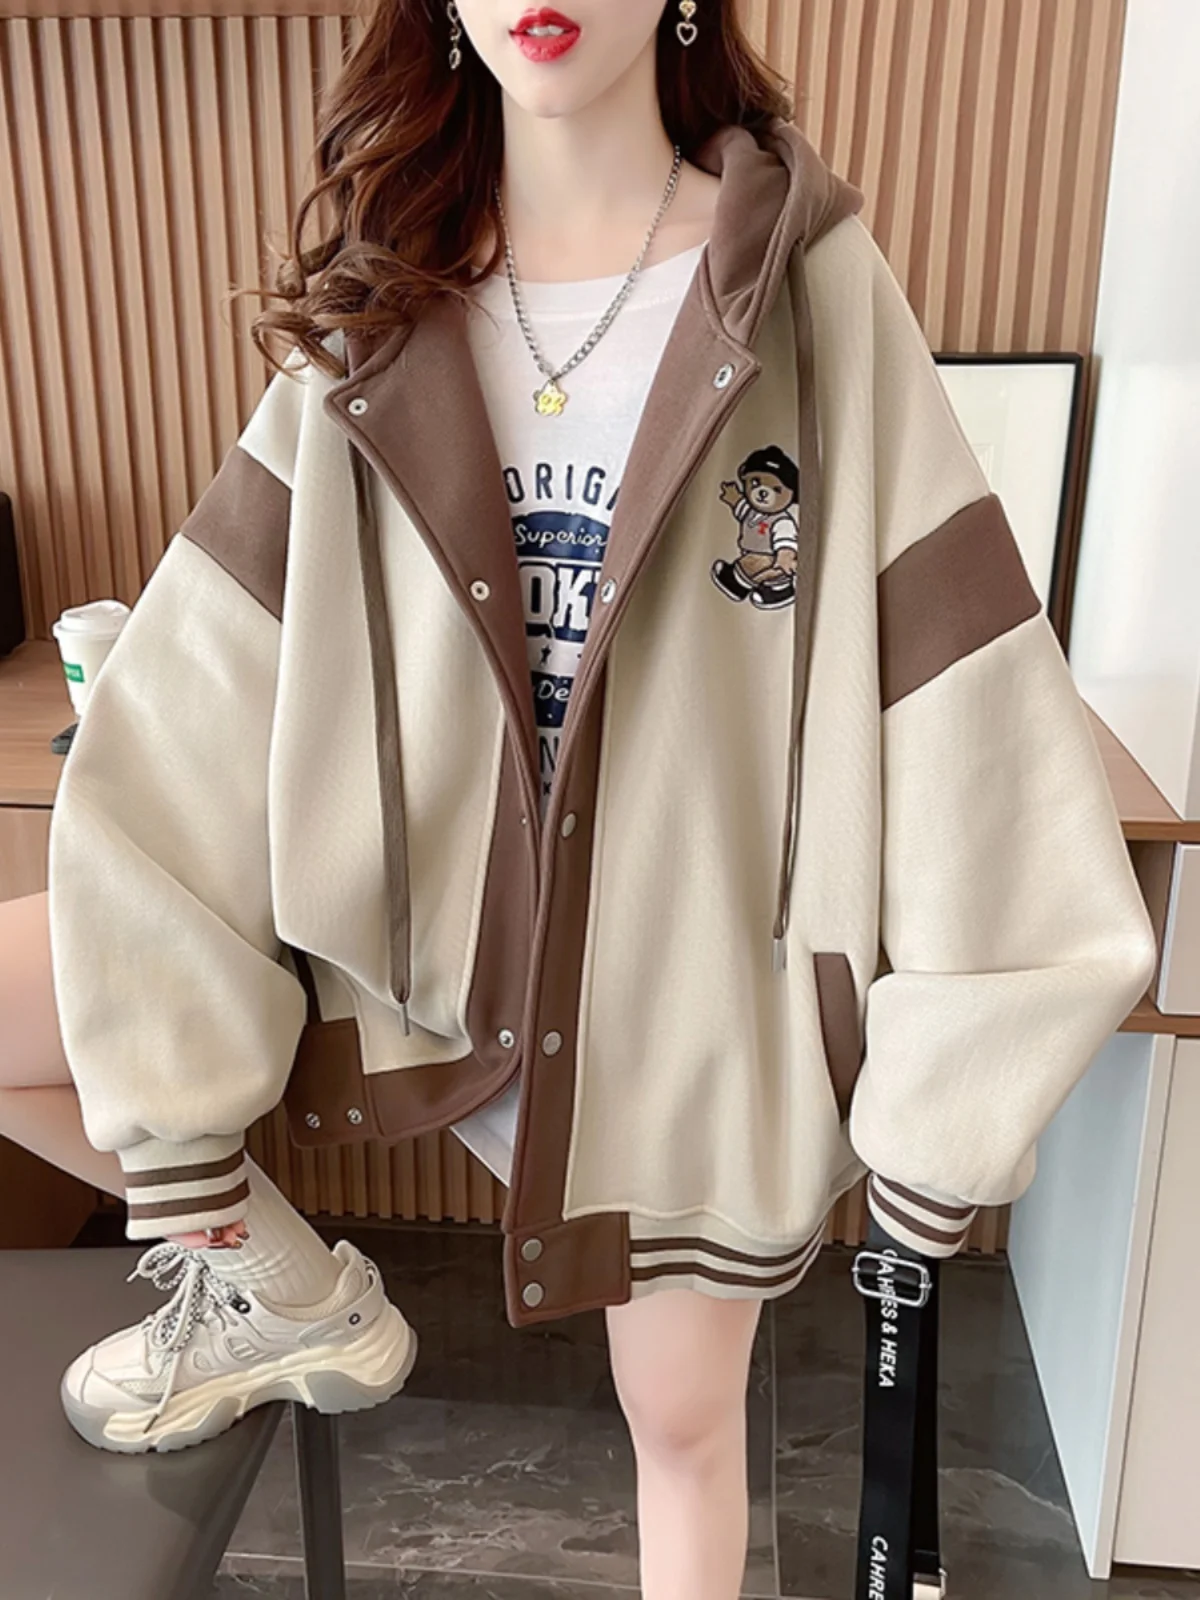 

Early Autumn New Hooded Colour Collision Sweater Women in The Long Section To Cover The Buttocks To Match The Baseball Suit